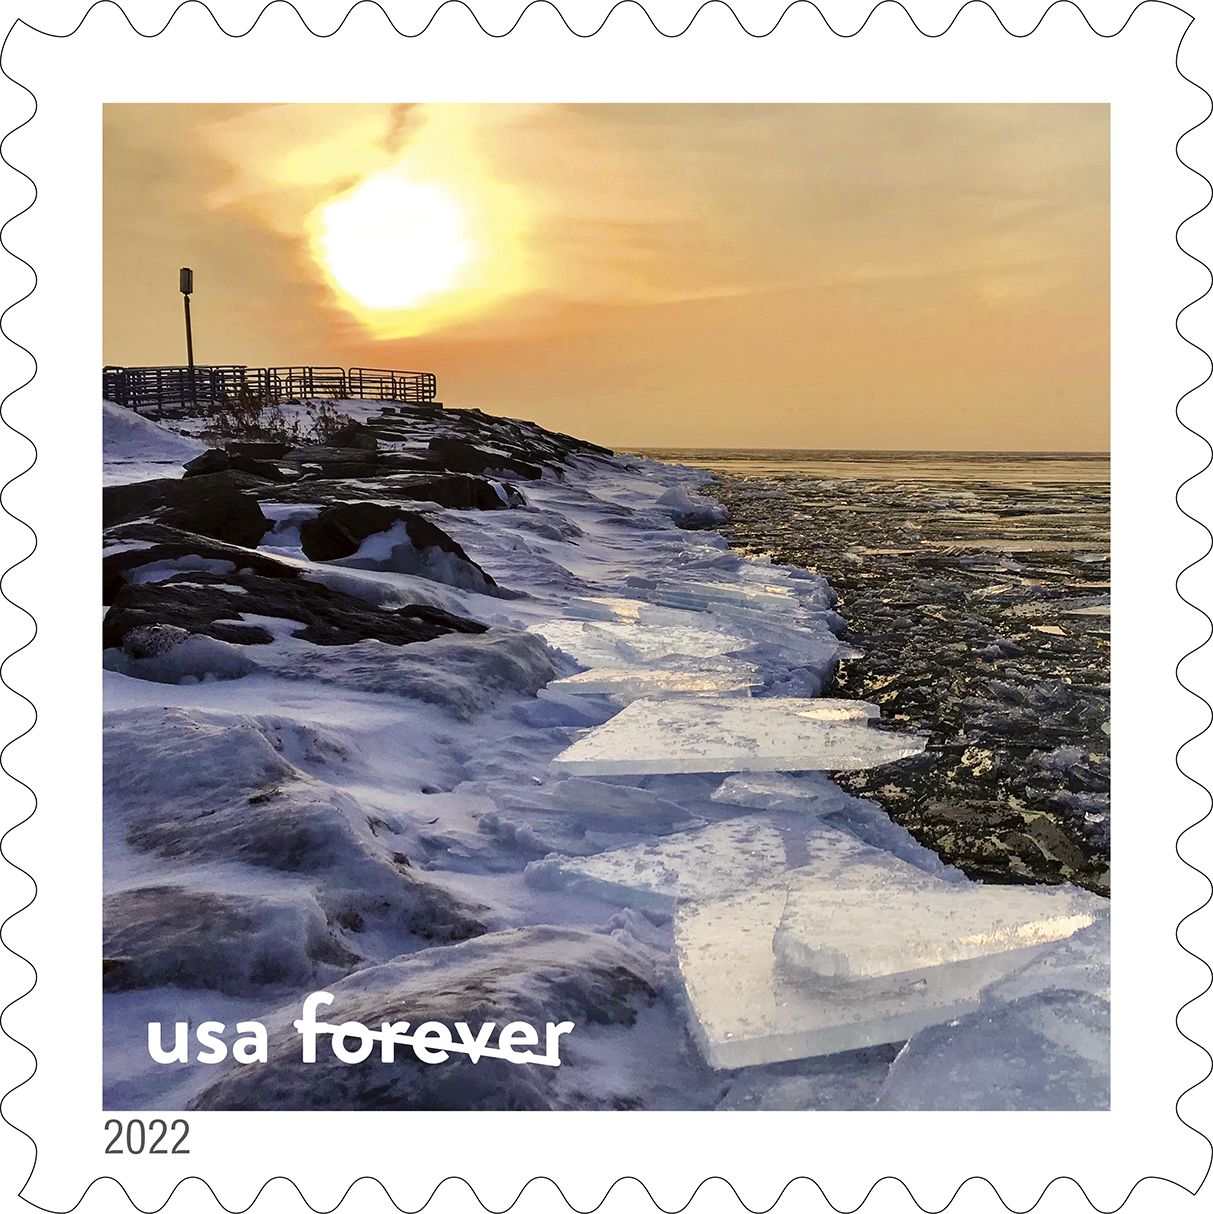 U.S. Postal Service releases stamps featuring NOAA's National Marine  Sanctuaries